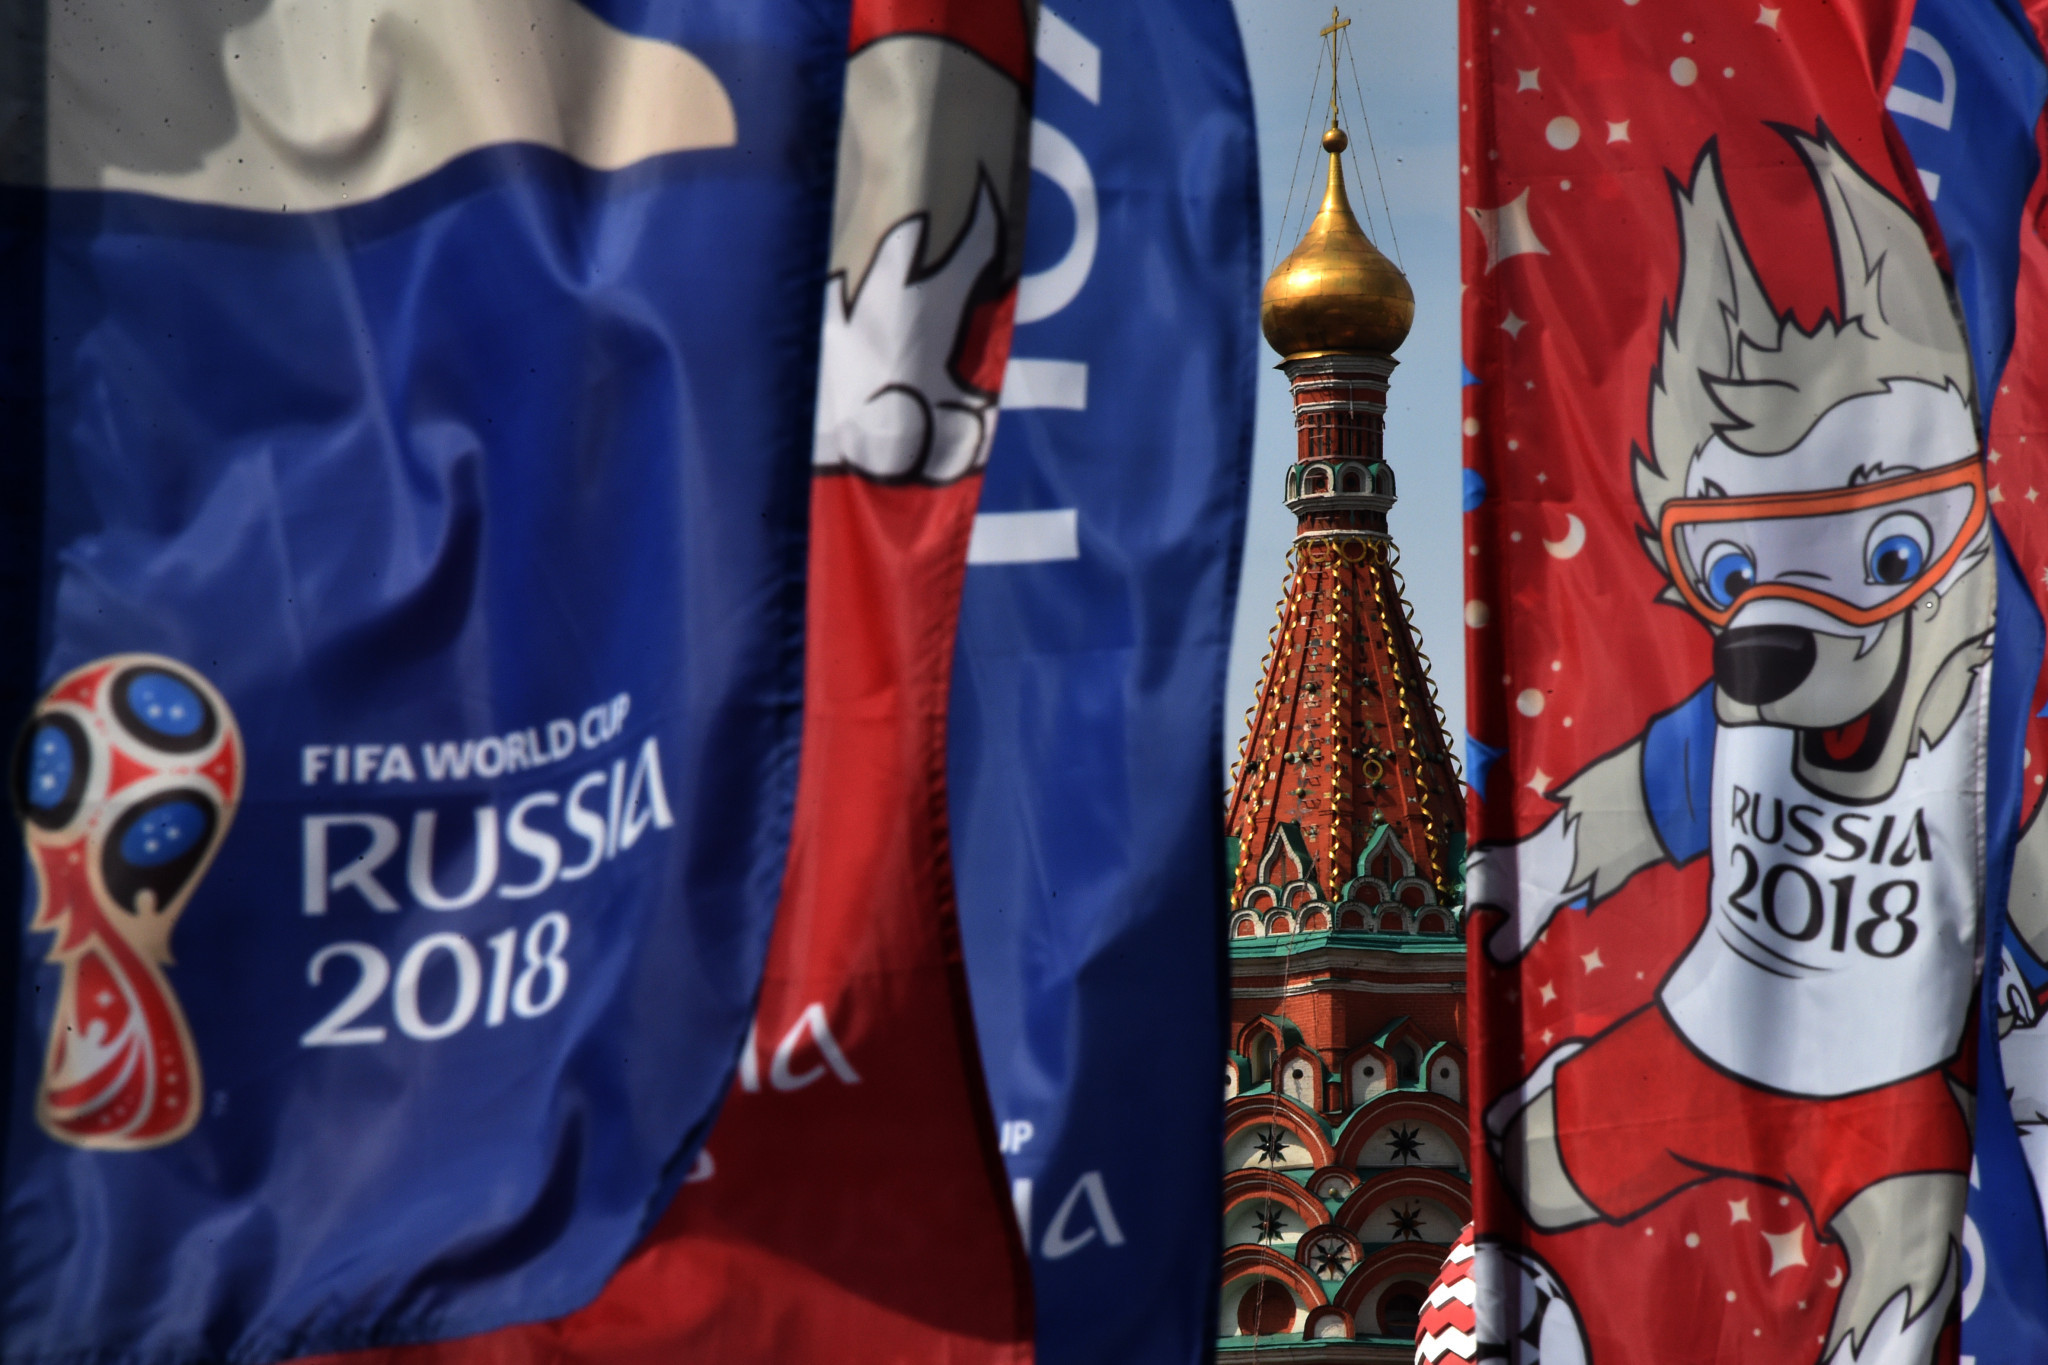 Russia and Qatar issue denials after US indictment alleges bribes paid for FIFA World Cups